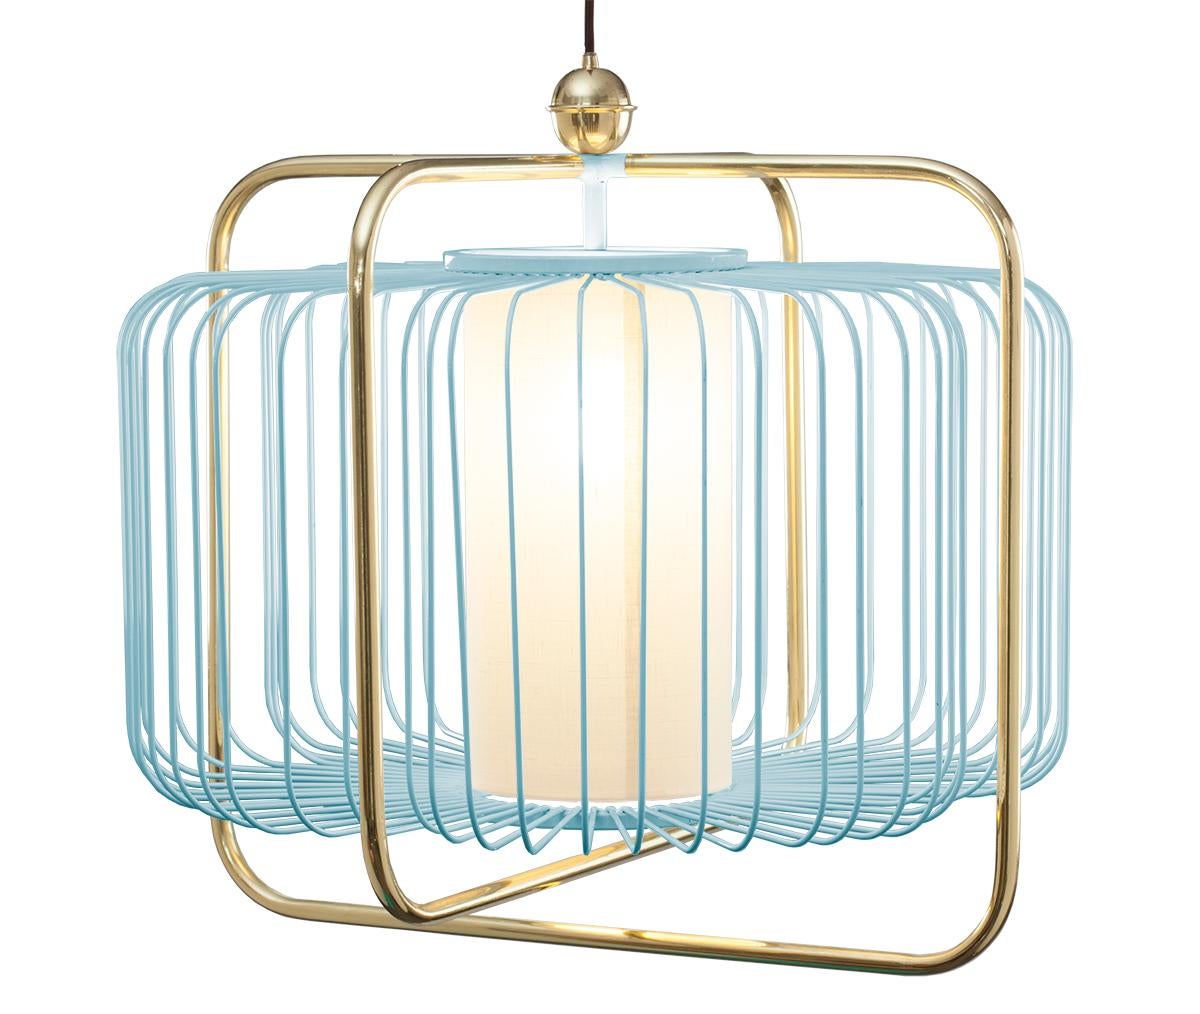 Contemporary Art Deco inspired Jules I Pendant Lamp in Brass and Black For Sale 2